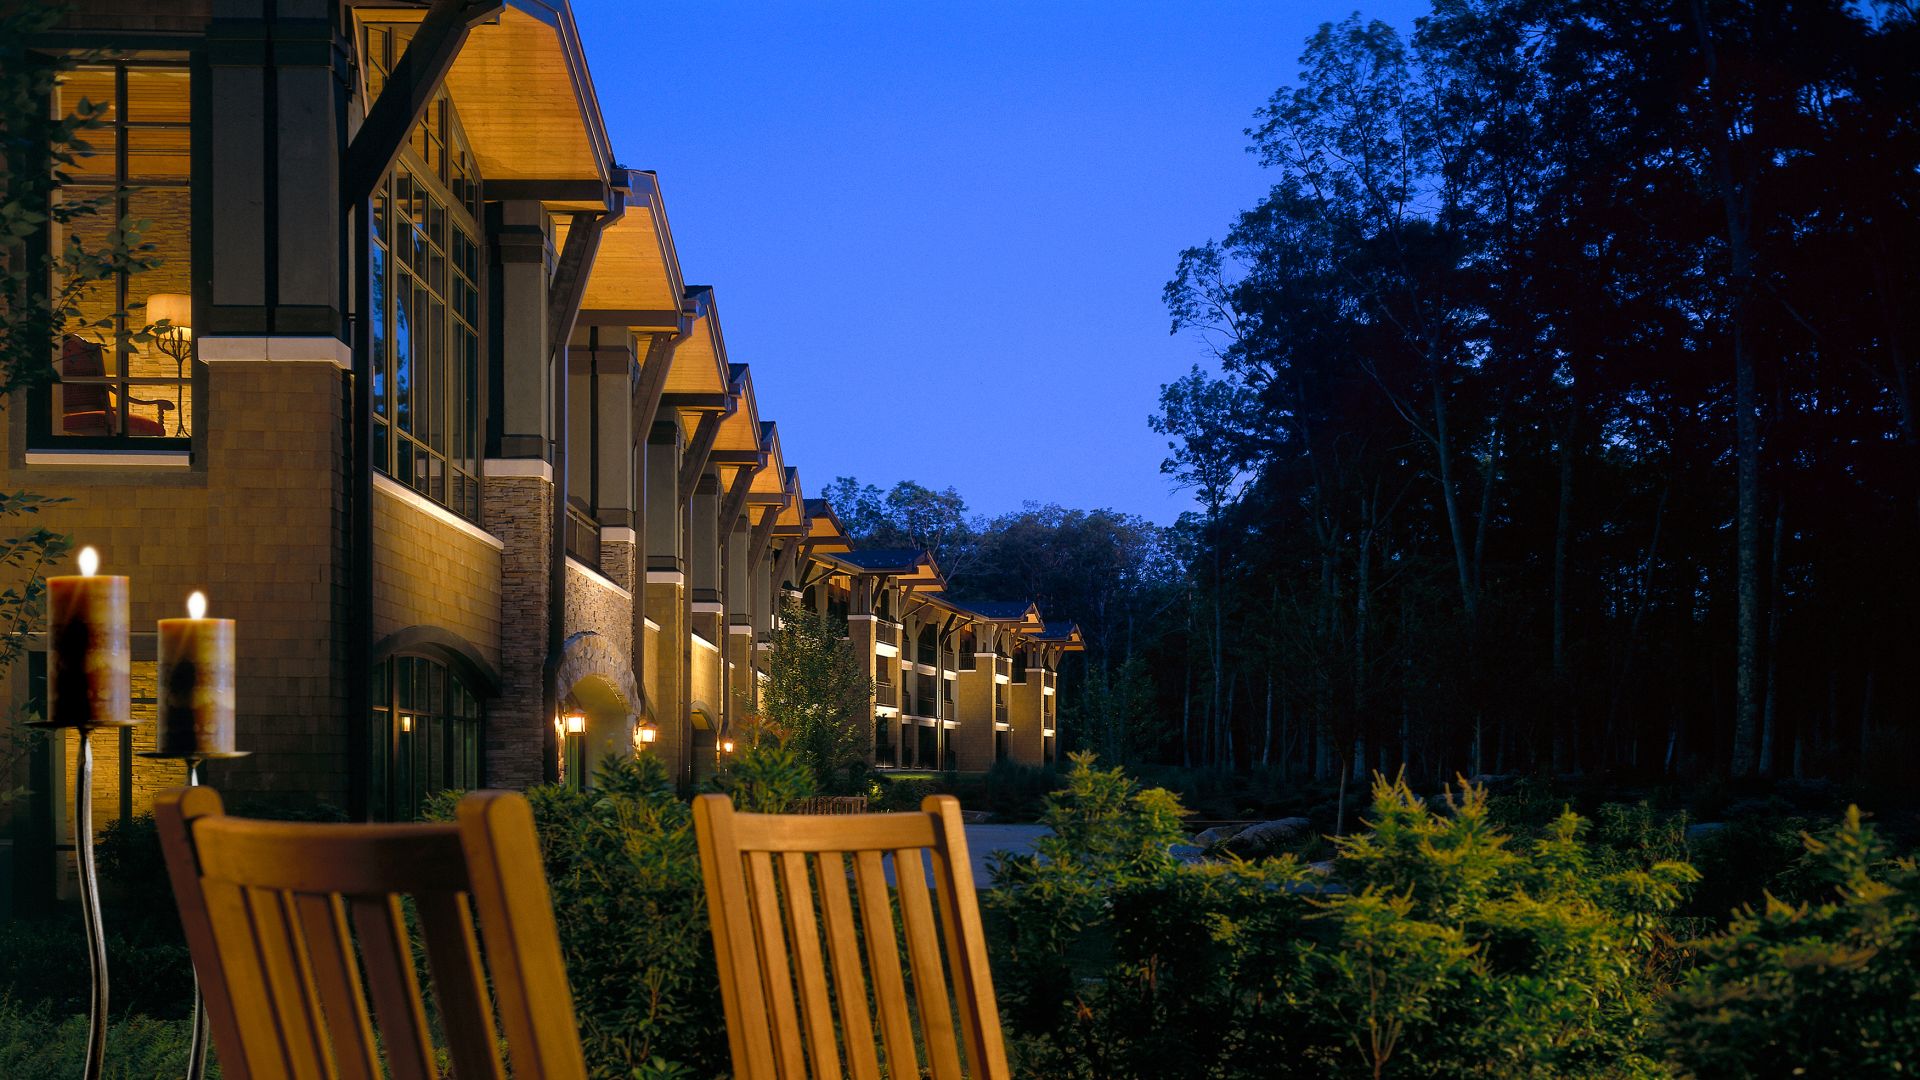 The back exterior view of The Lodge at Woodloch at dusk in the summer